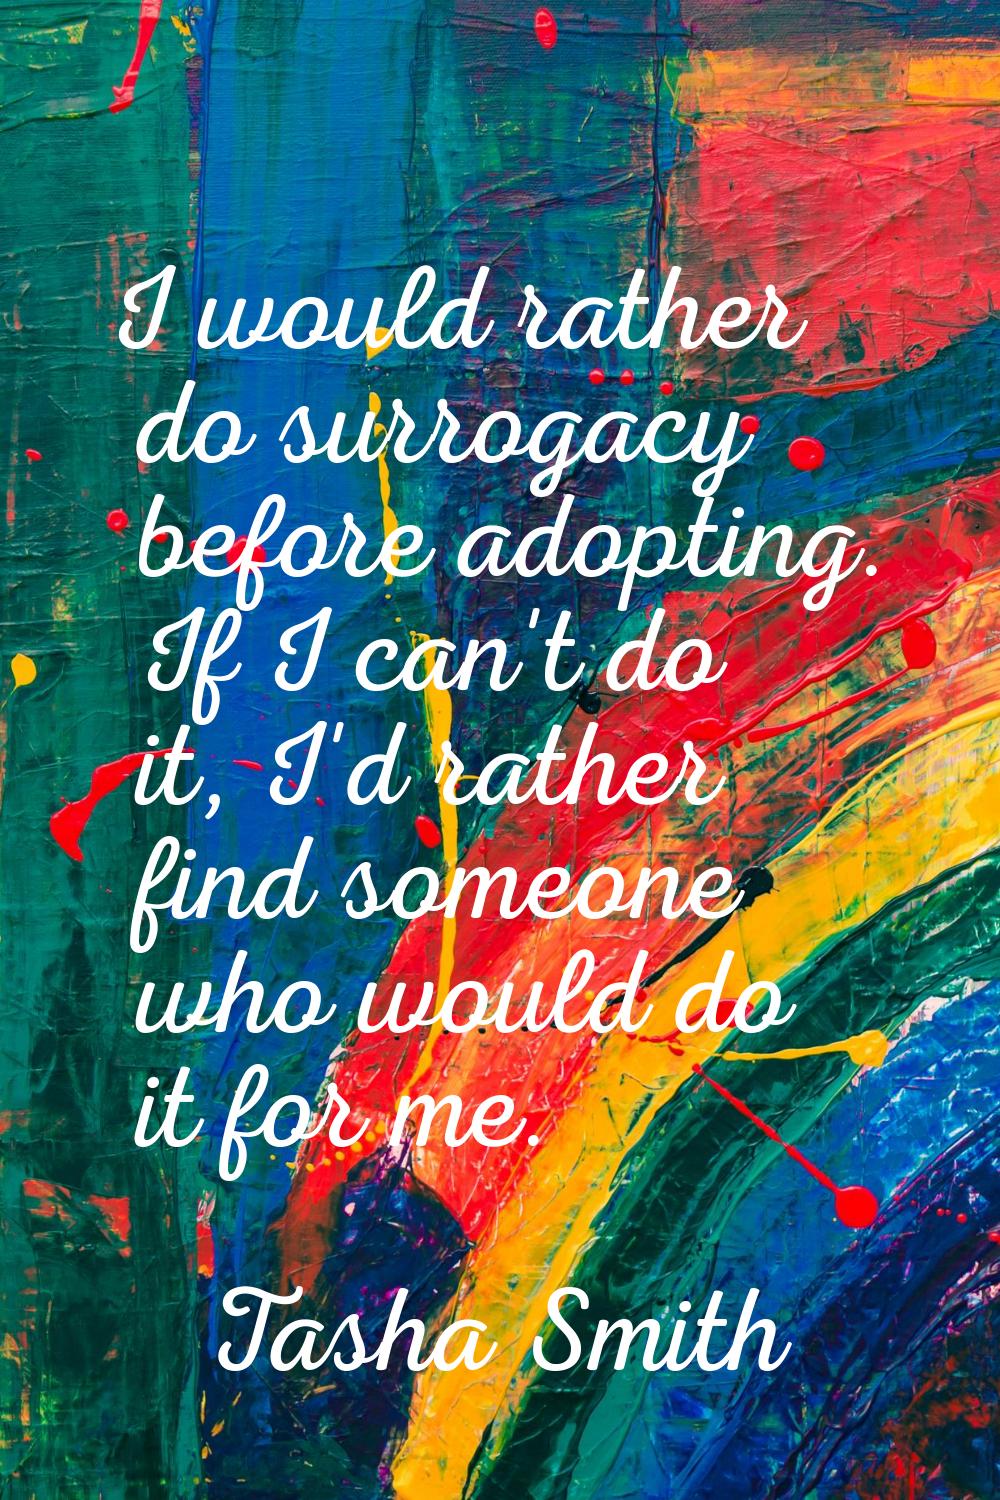 I would rather do surrogacy before adopting. If I can't do it, I'd rather find someone who would do